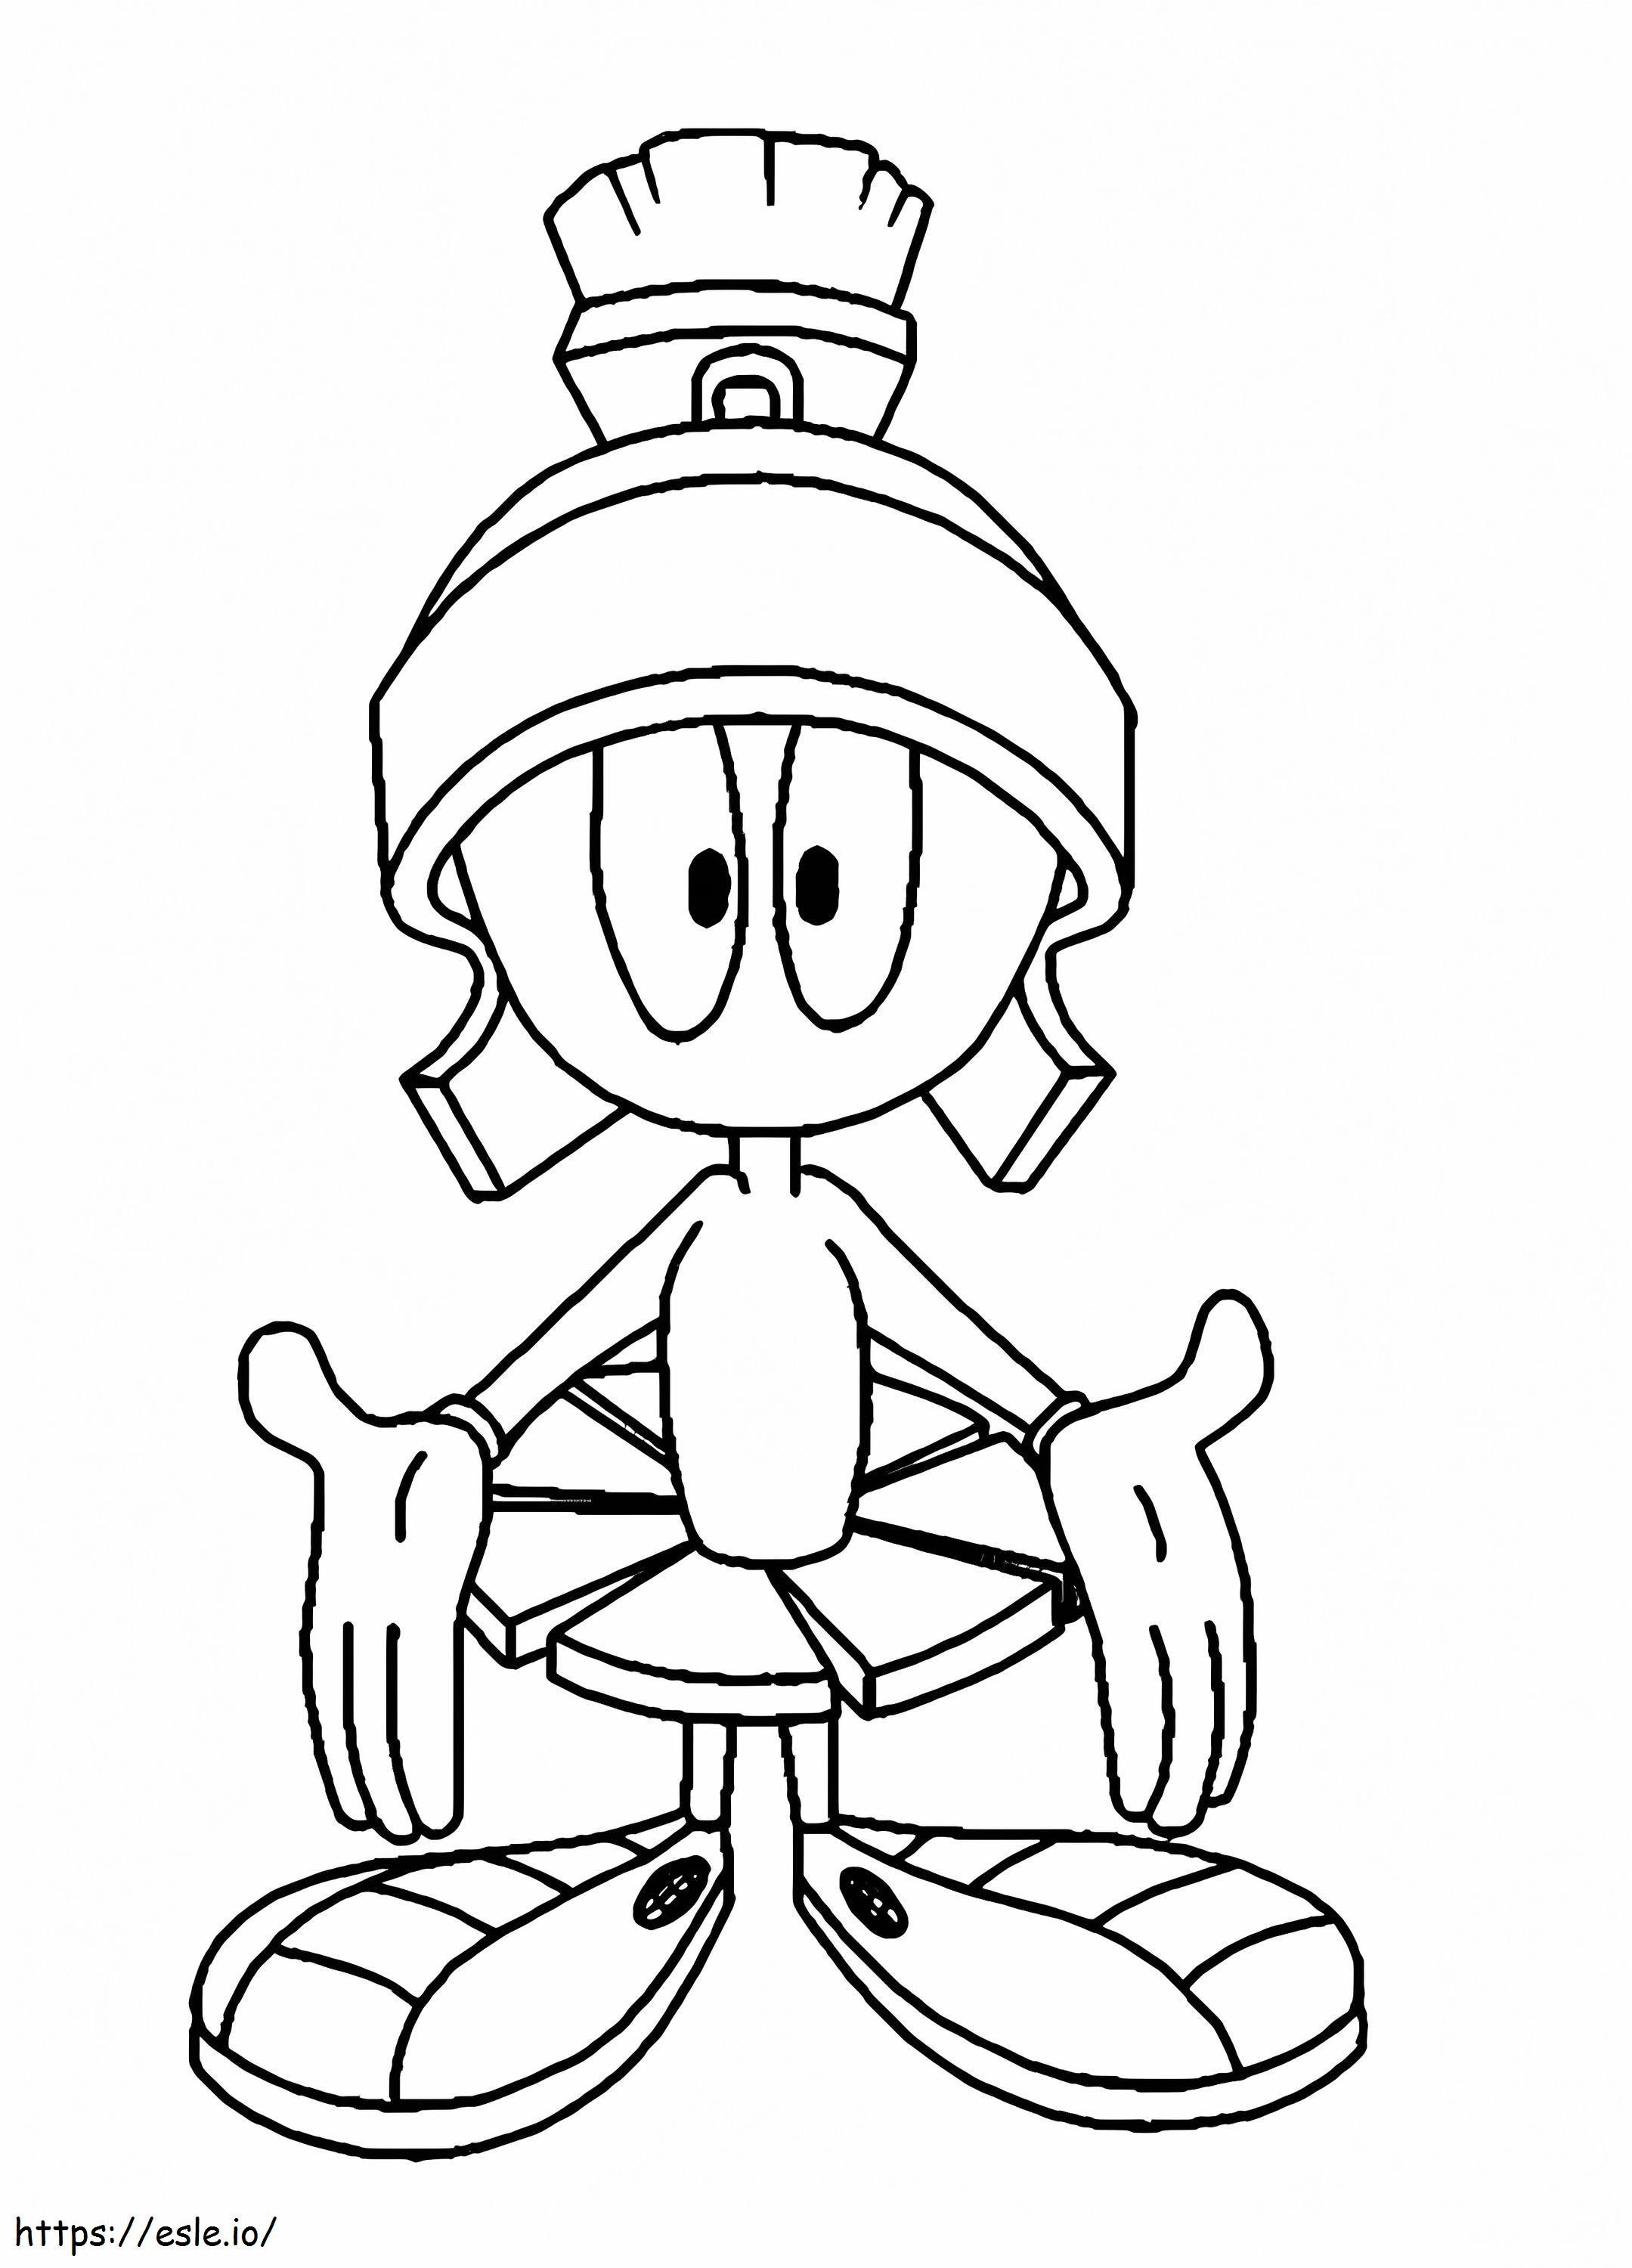 Looney Tunes Marvin The Martian coloring page